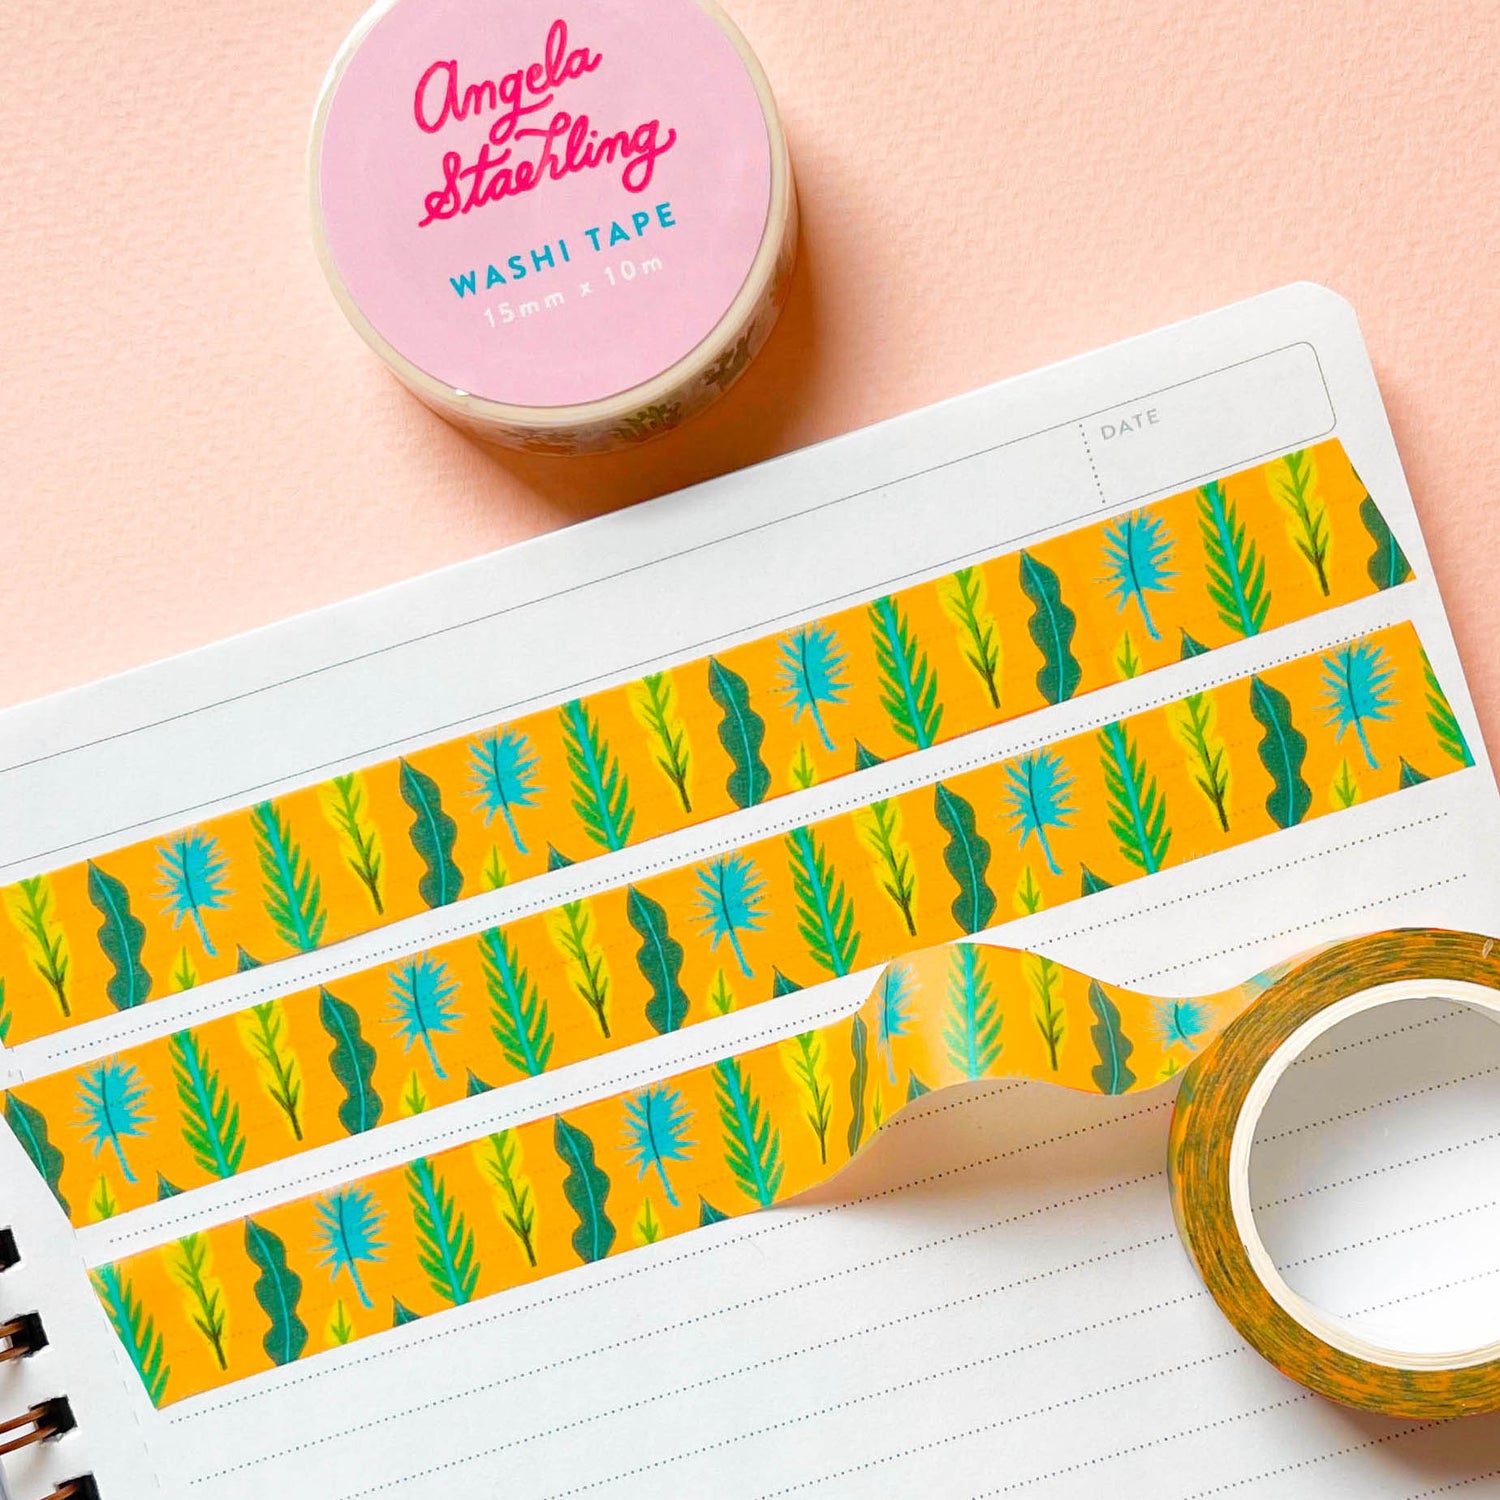 Tropical gold washi tape with leaf pattern